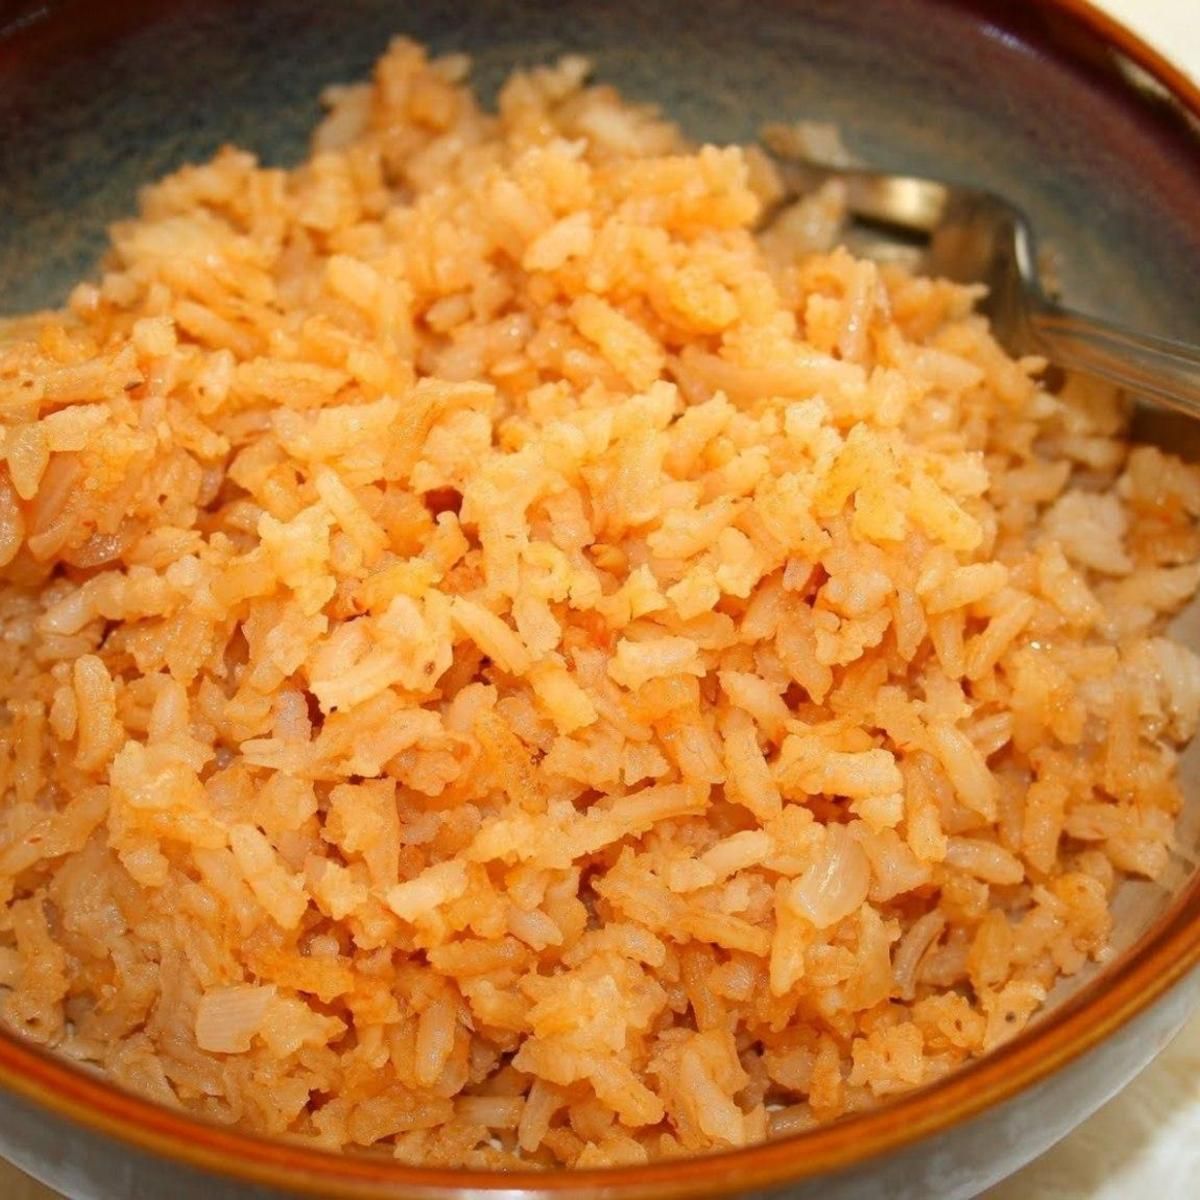 This is how we Mexicans from California make our rice. We call it Spanish rice, not mexican rice! I didn’t hear the term “mexican